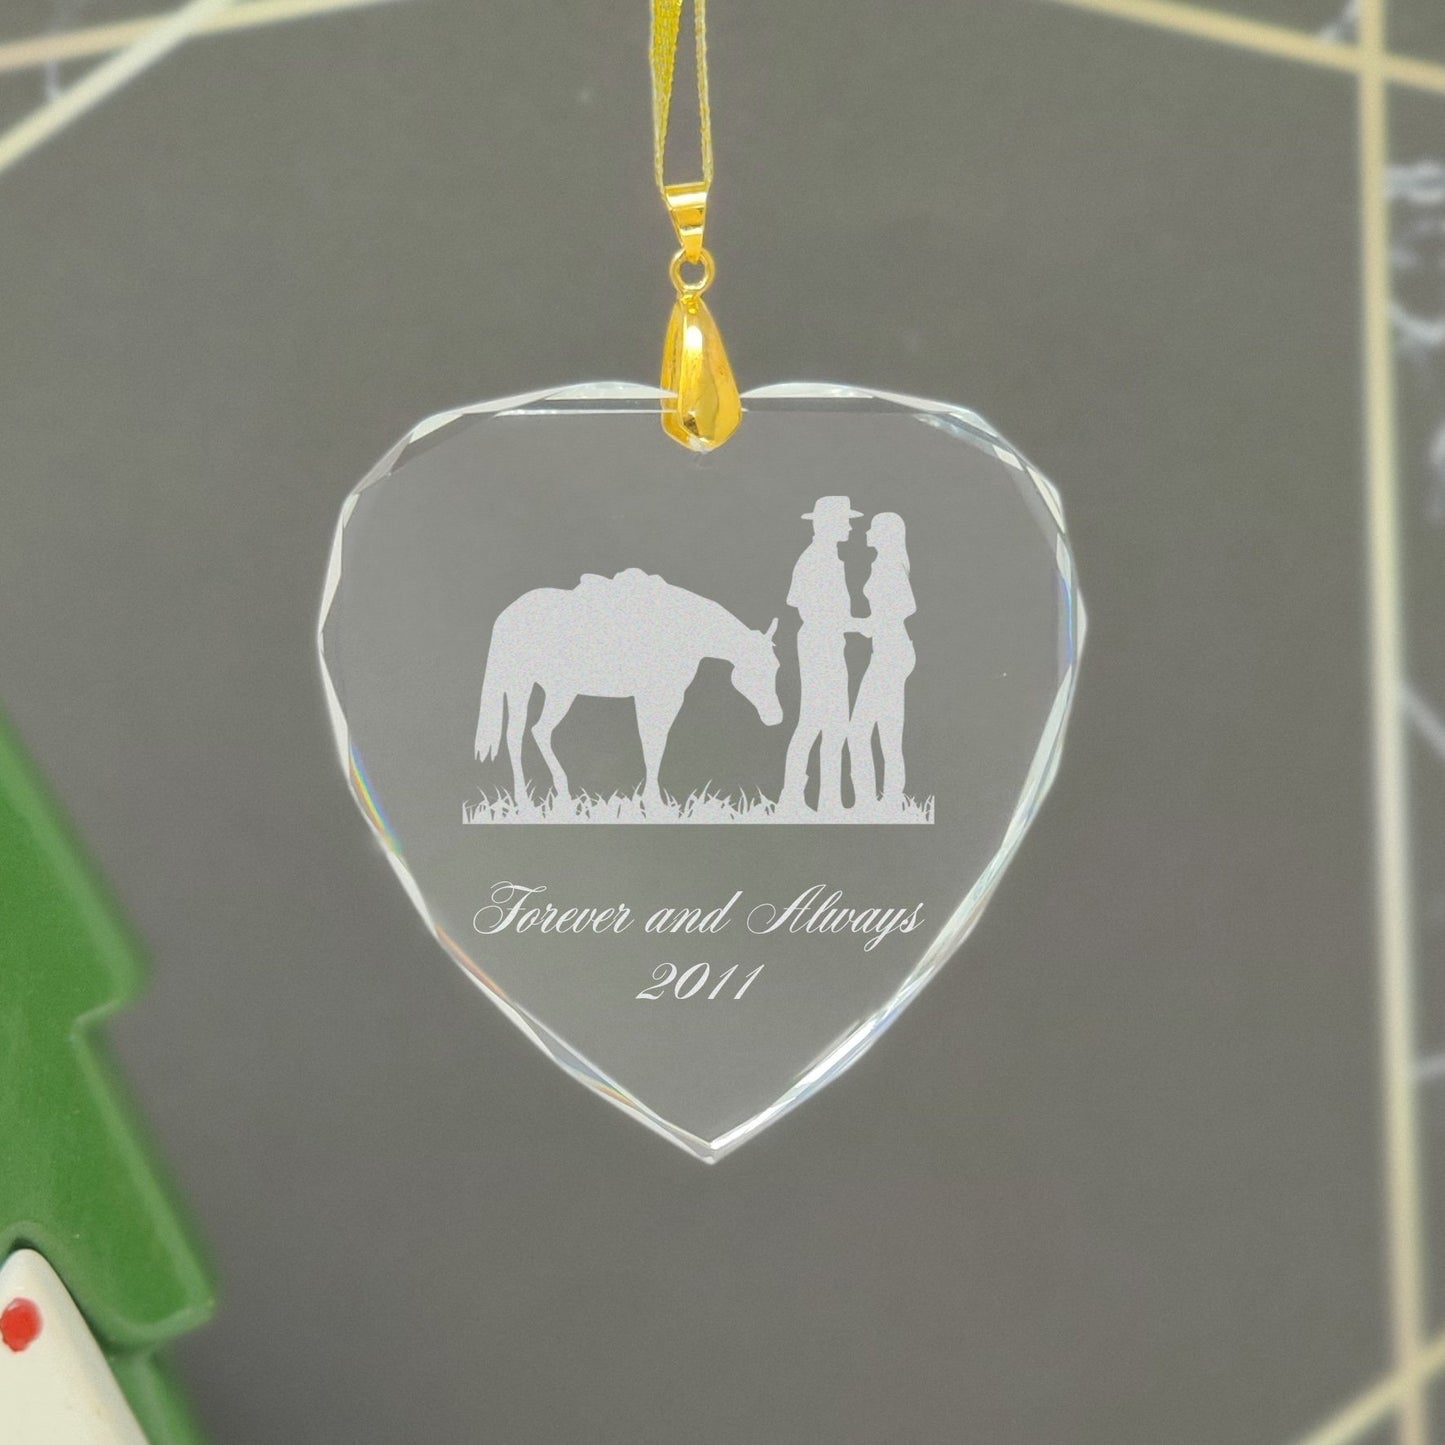 LaserGram Christmas Ornament, World's Greatest Husband, Personalized Engraving Included (Heart Shape)